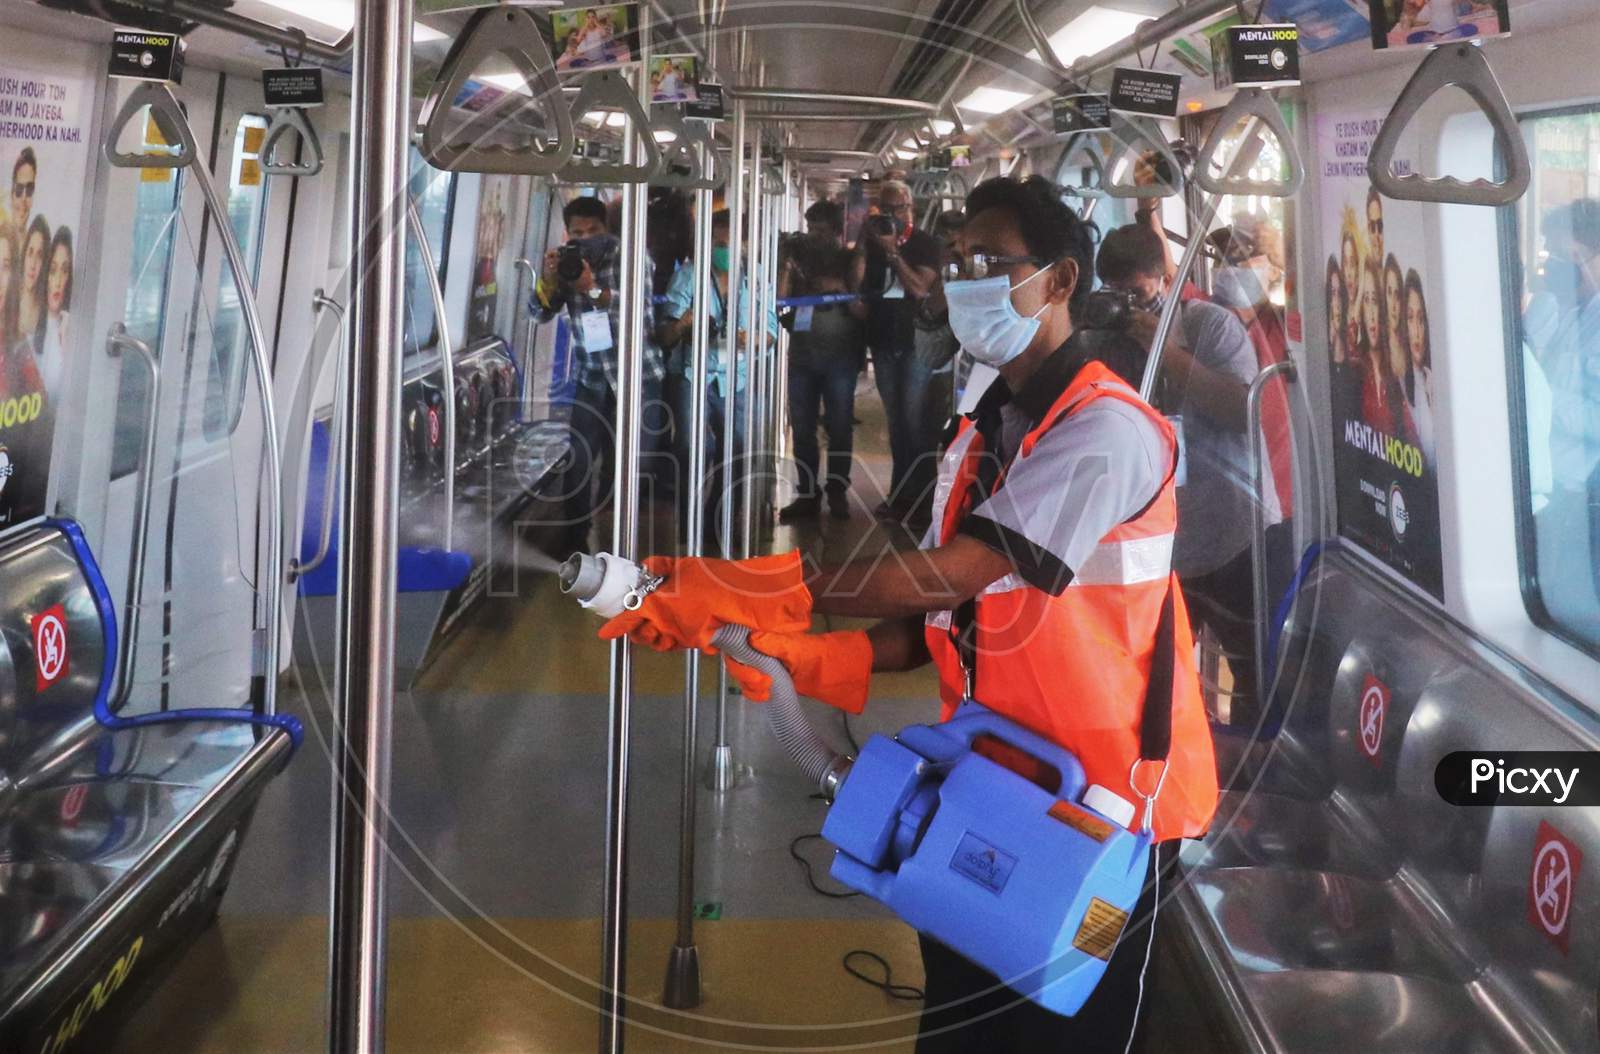 A worker sanitizes a coach as the metro network prepares to resume services after more than a 6-month shutdown due to the Covid-19 coronavirus pandemic, at the Andheri metro station in Mumbai, October, 2020.